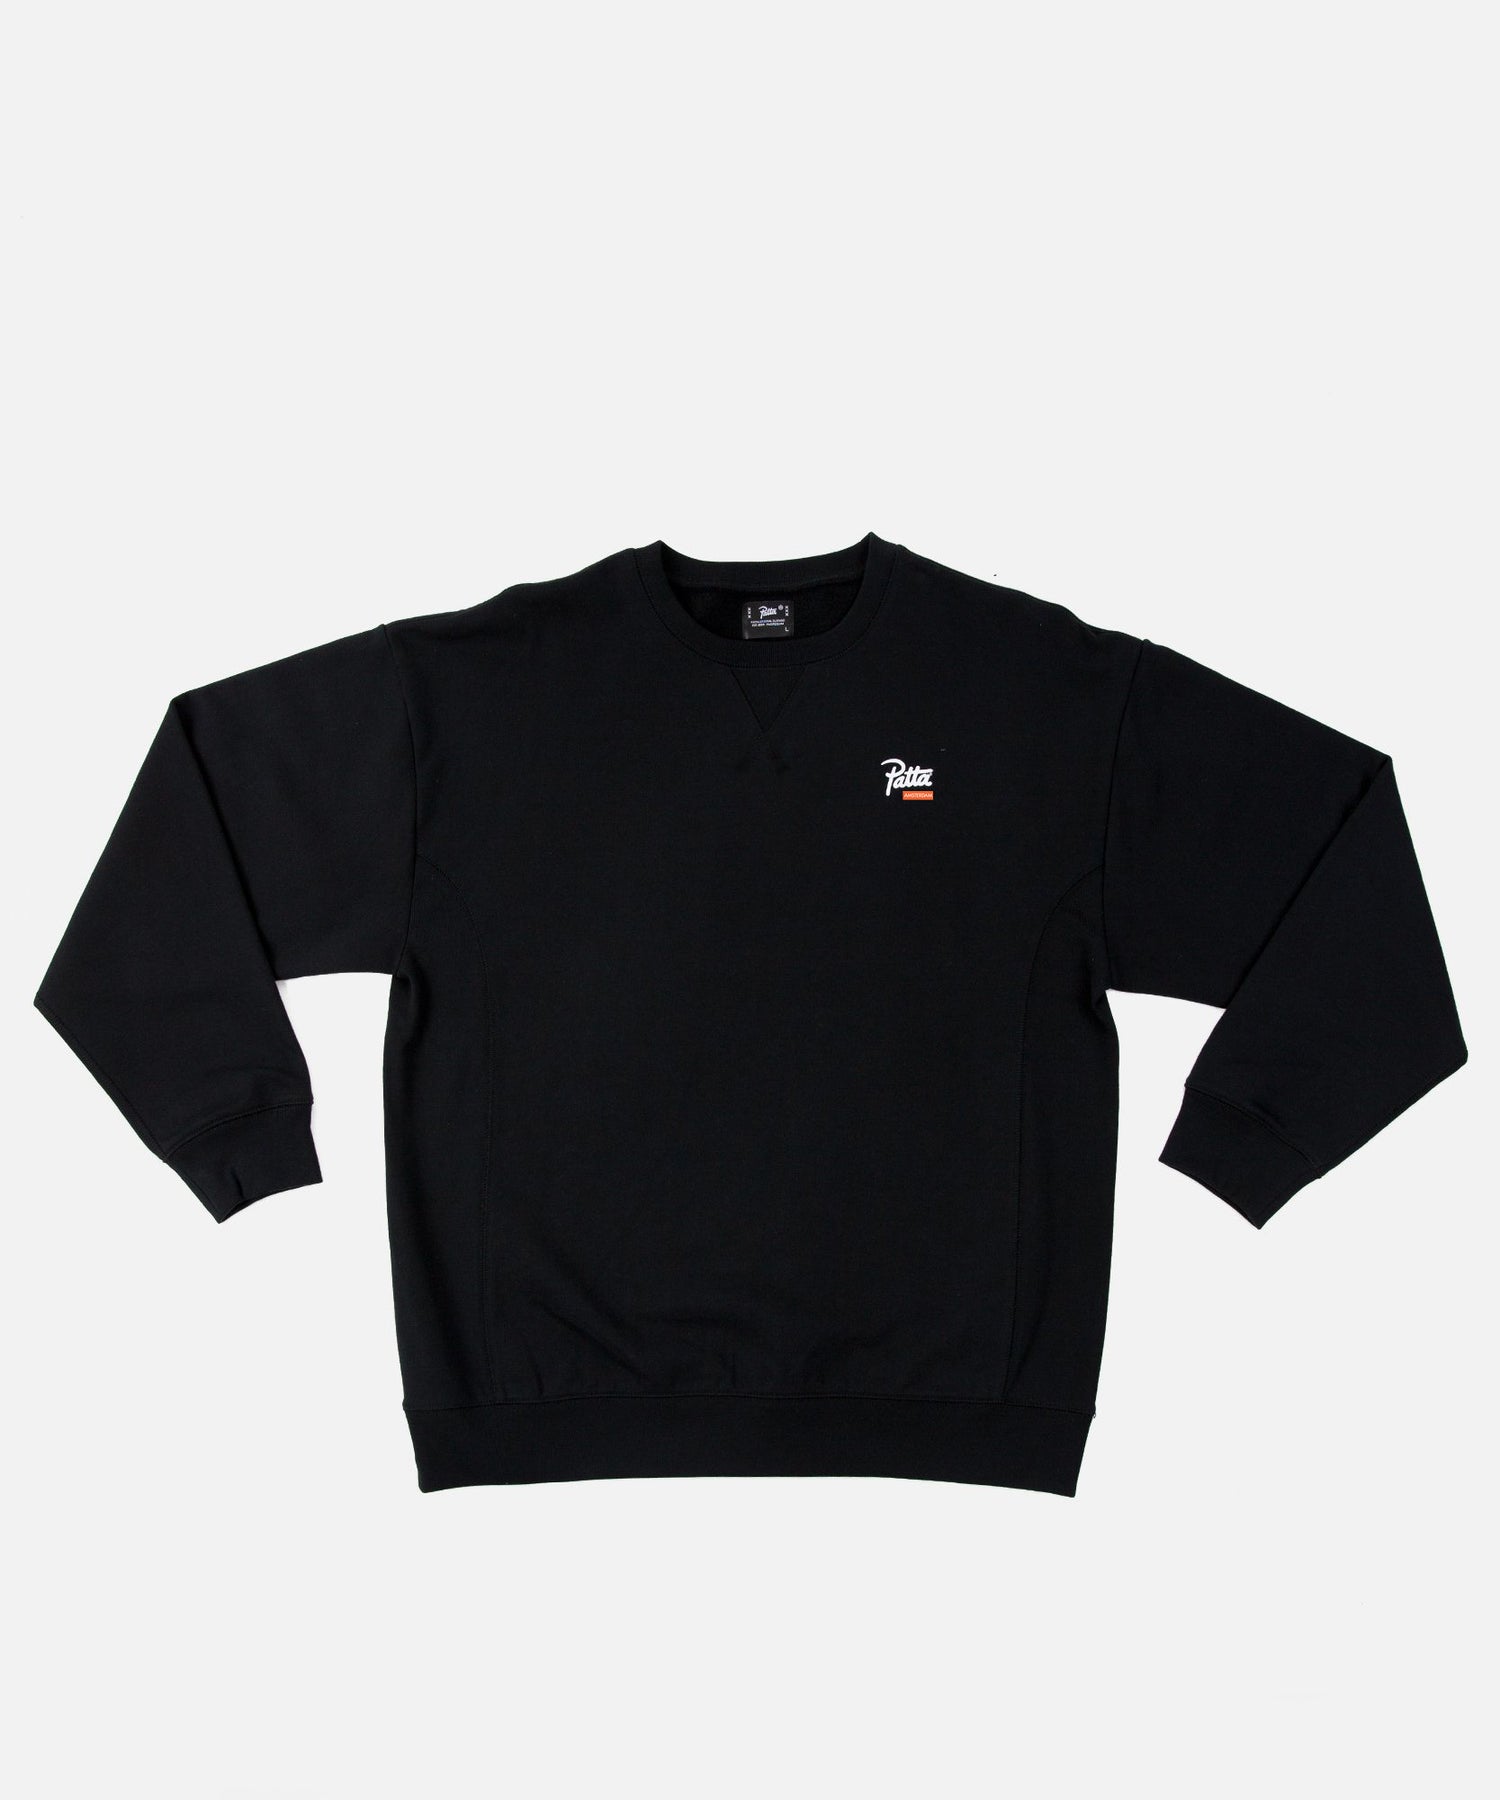 IN-STORE EXCLUSIVE: Patta Amsterdam Chapter Crewneck Sweater (Black)